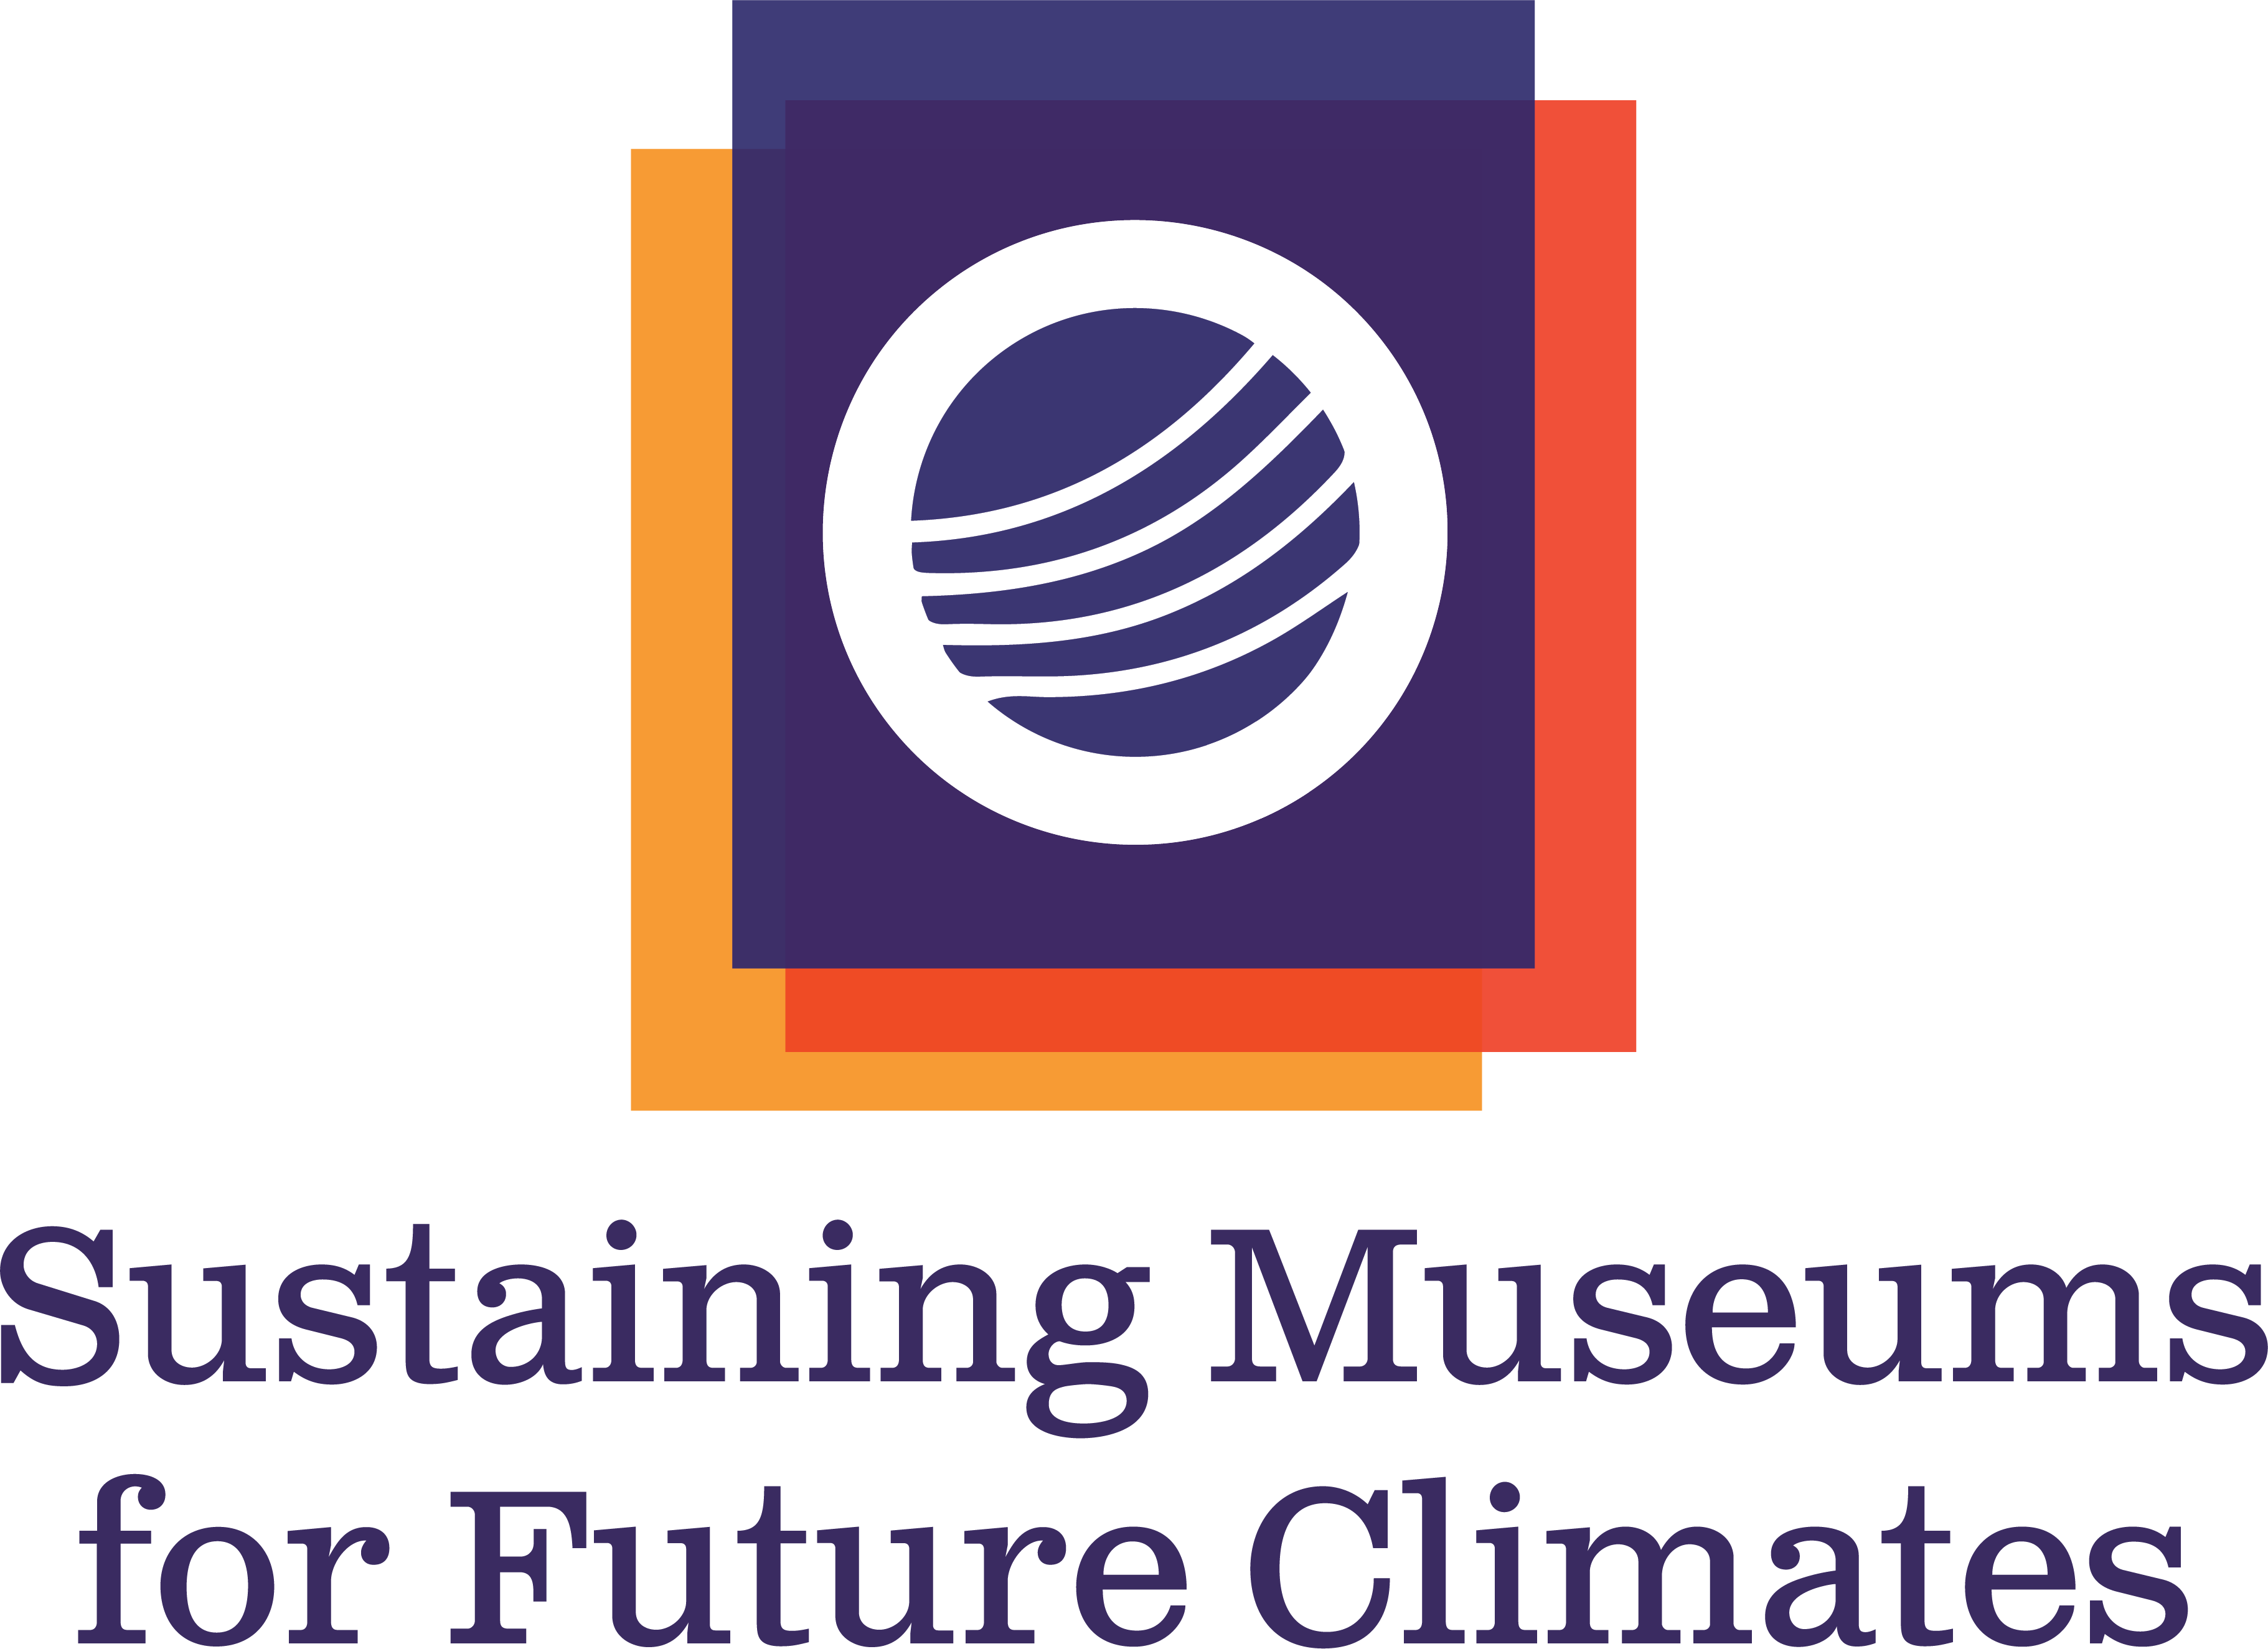 OMA logo O with four lines simulating waves or sunset, with text, "Sustaining Museums for Future Cli